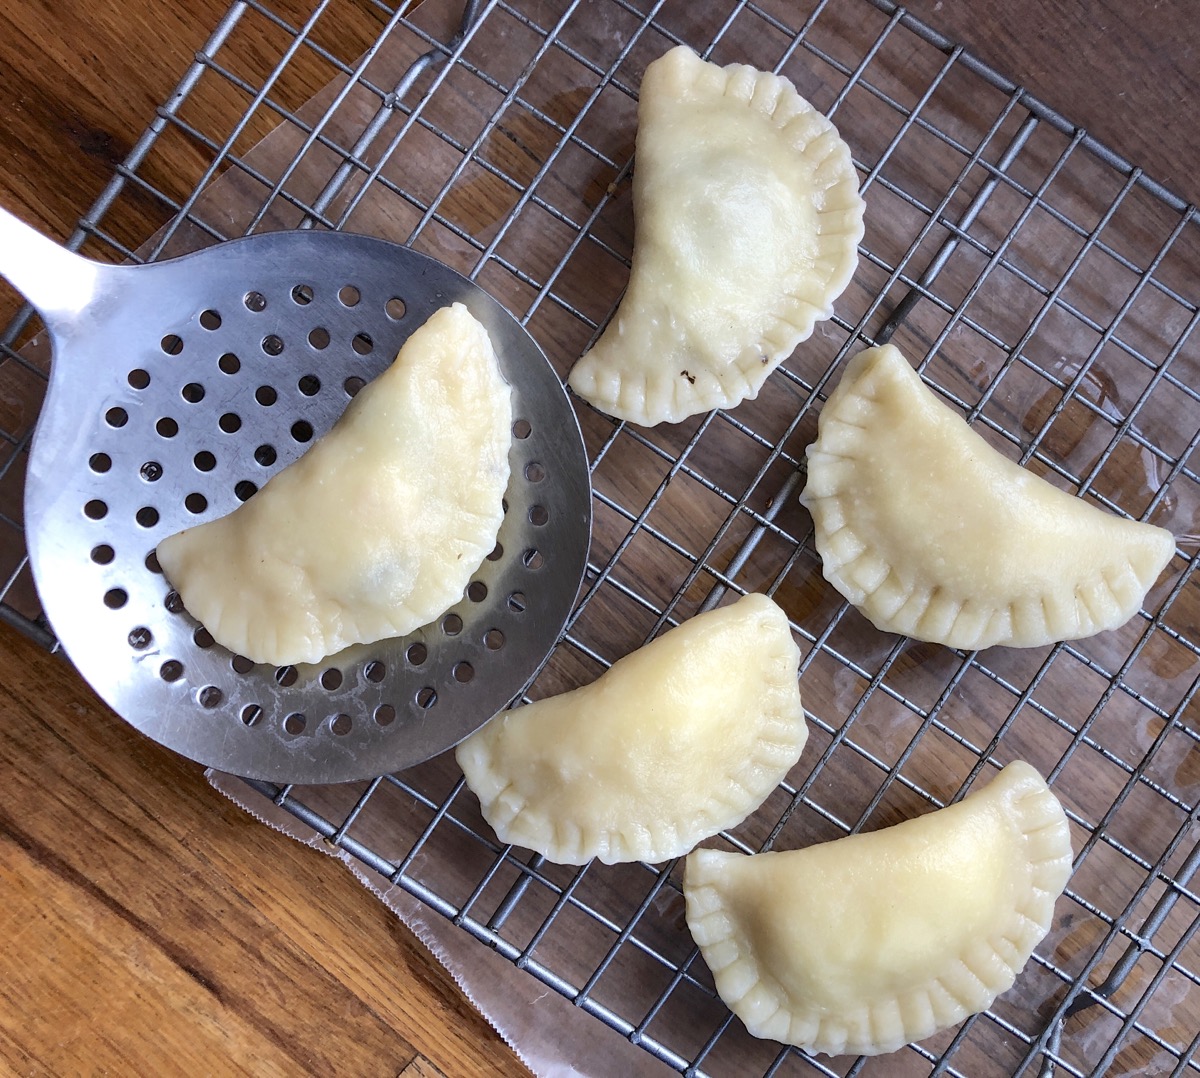 Cooked, drained pierogi on a cooling rack.